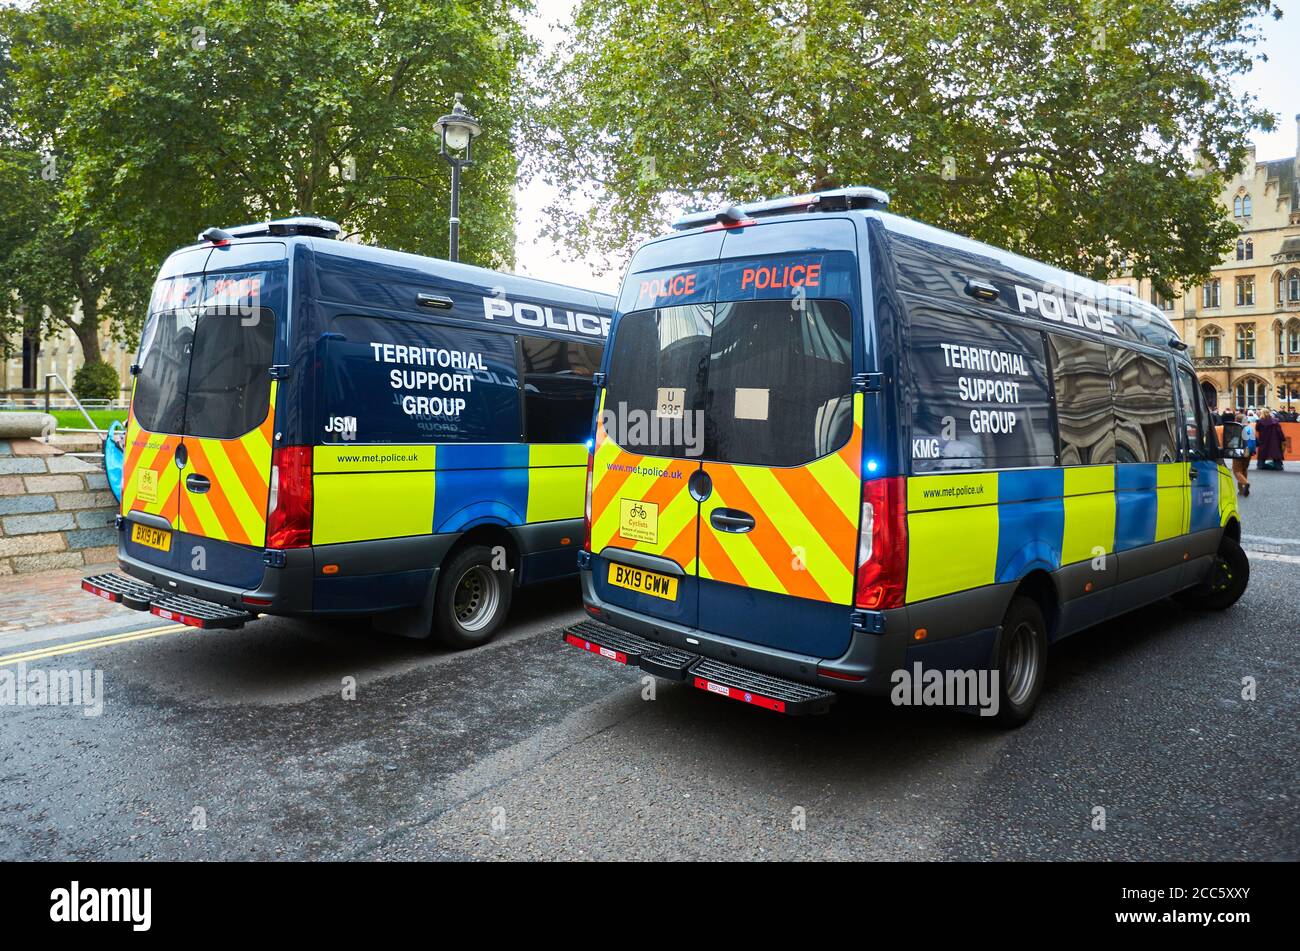 Two police vans from the Territorial Support Group, a unit of the Metropolitan police, parked in central London Stock Photo